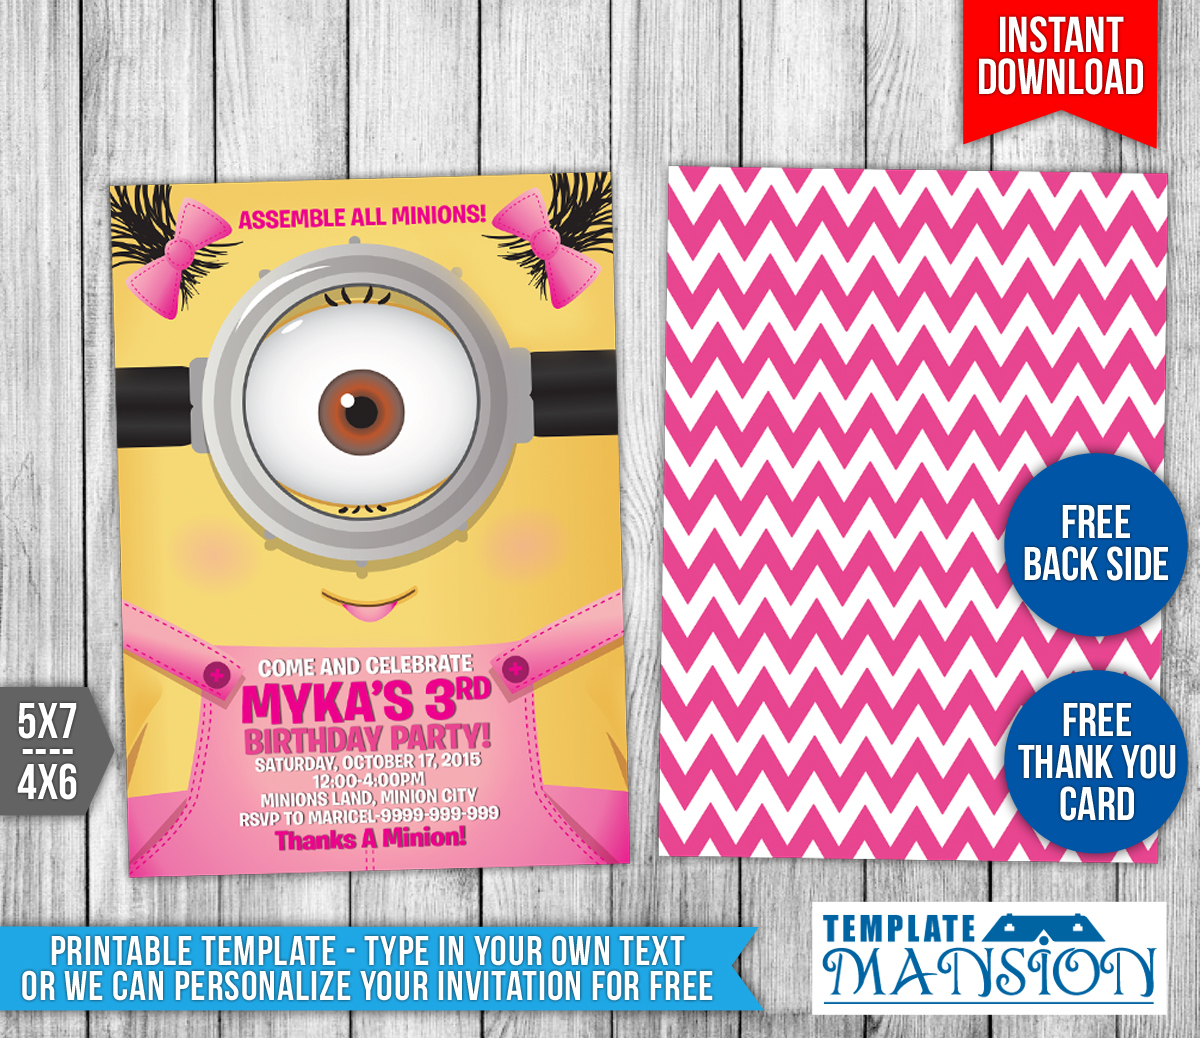 Girl Minions Birthday Invitation Template #23 by templatemansion on Intended For Minion Card Template